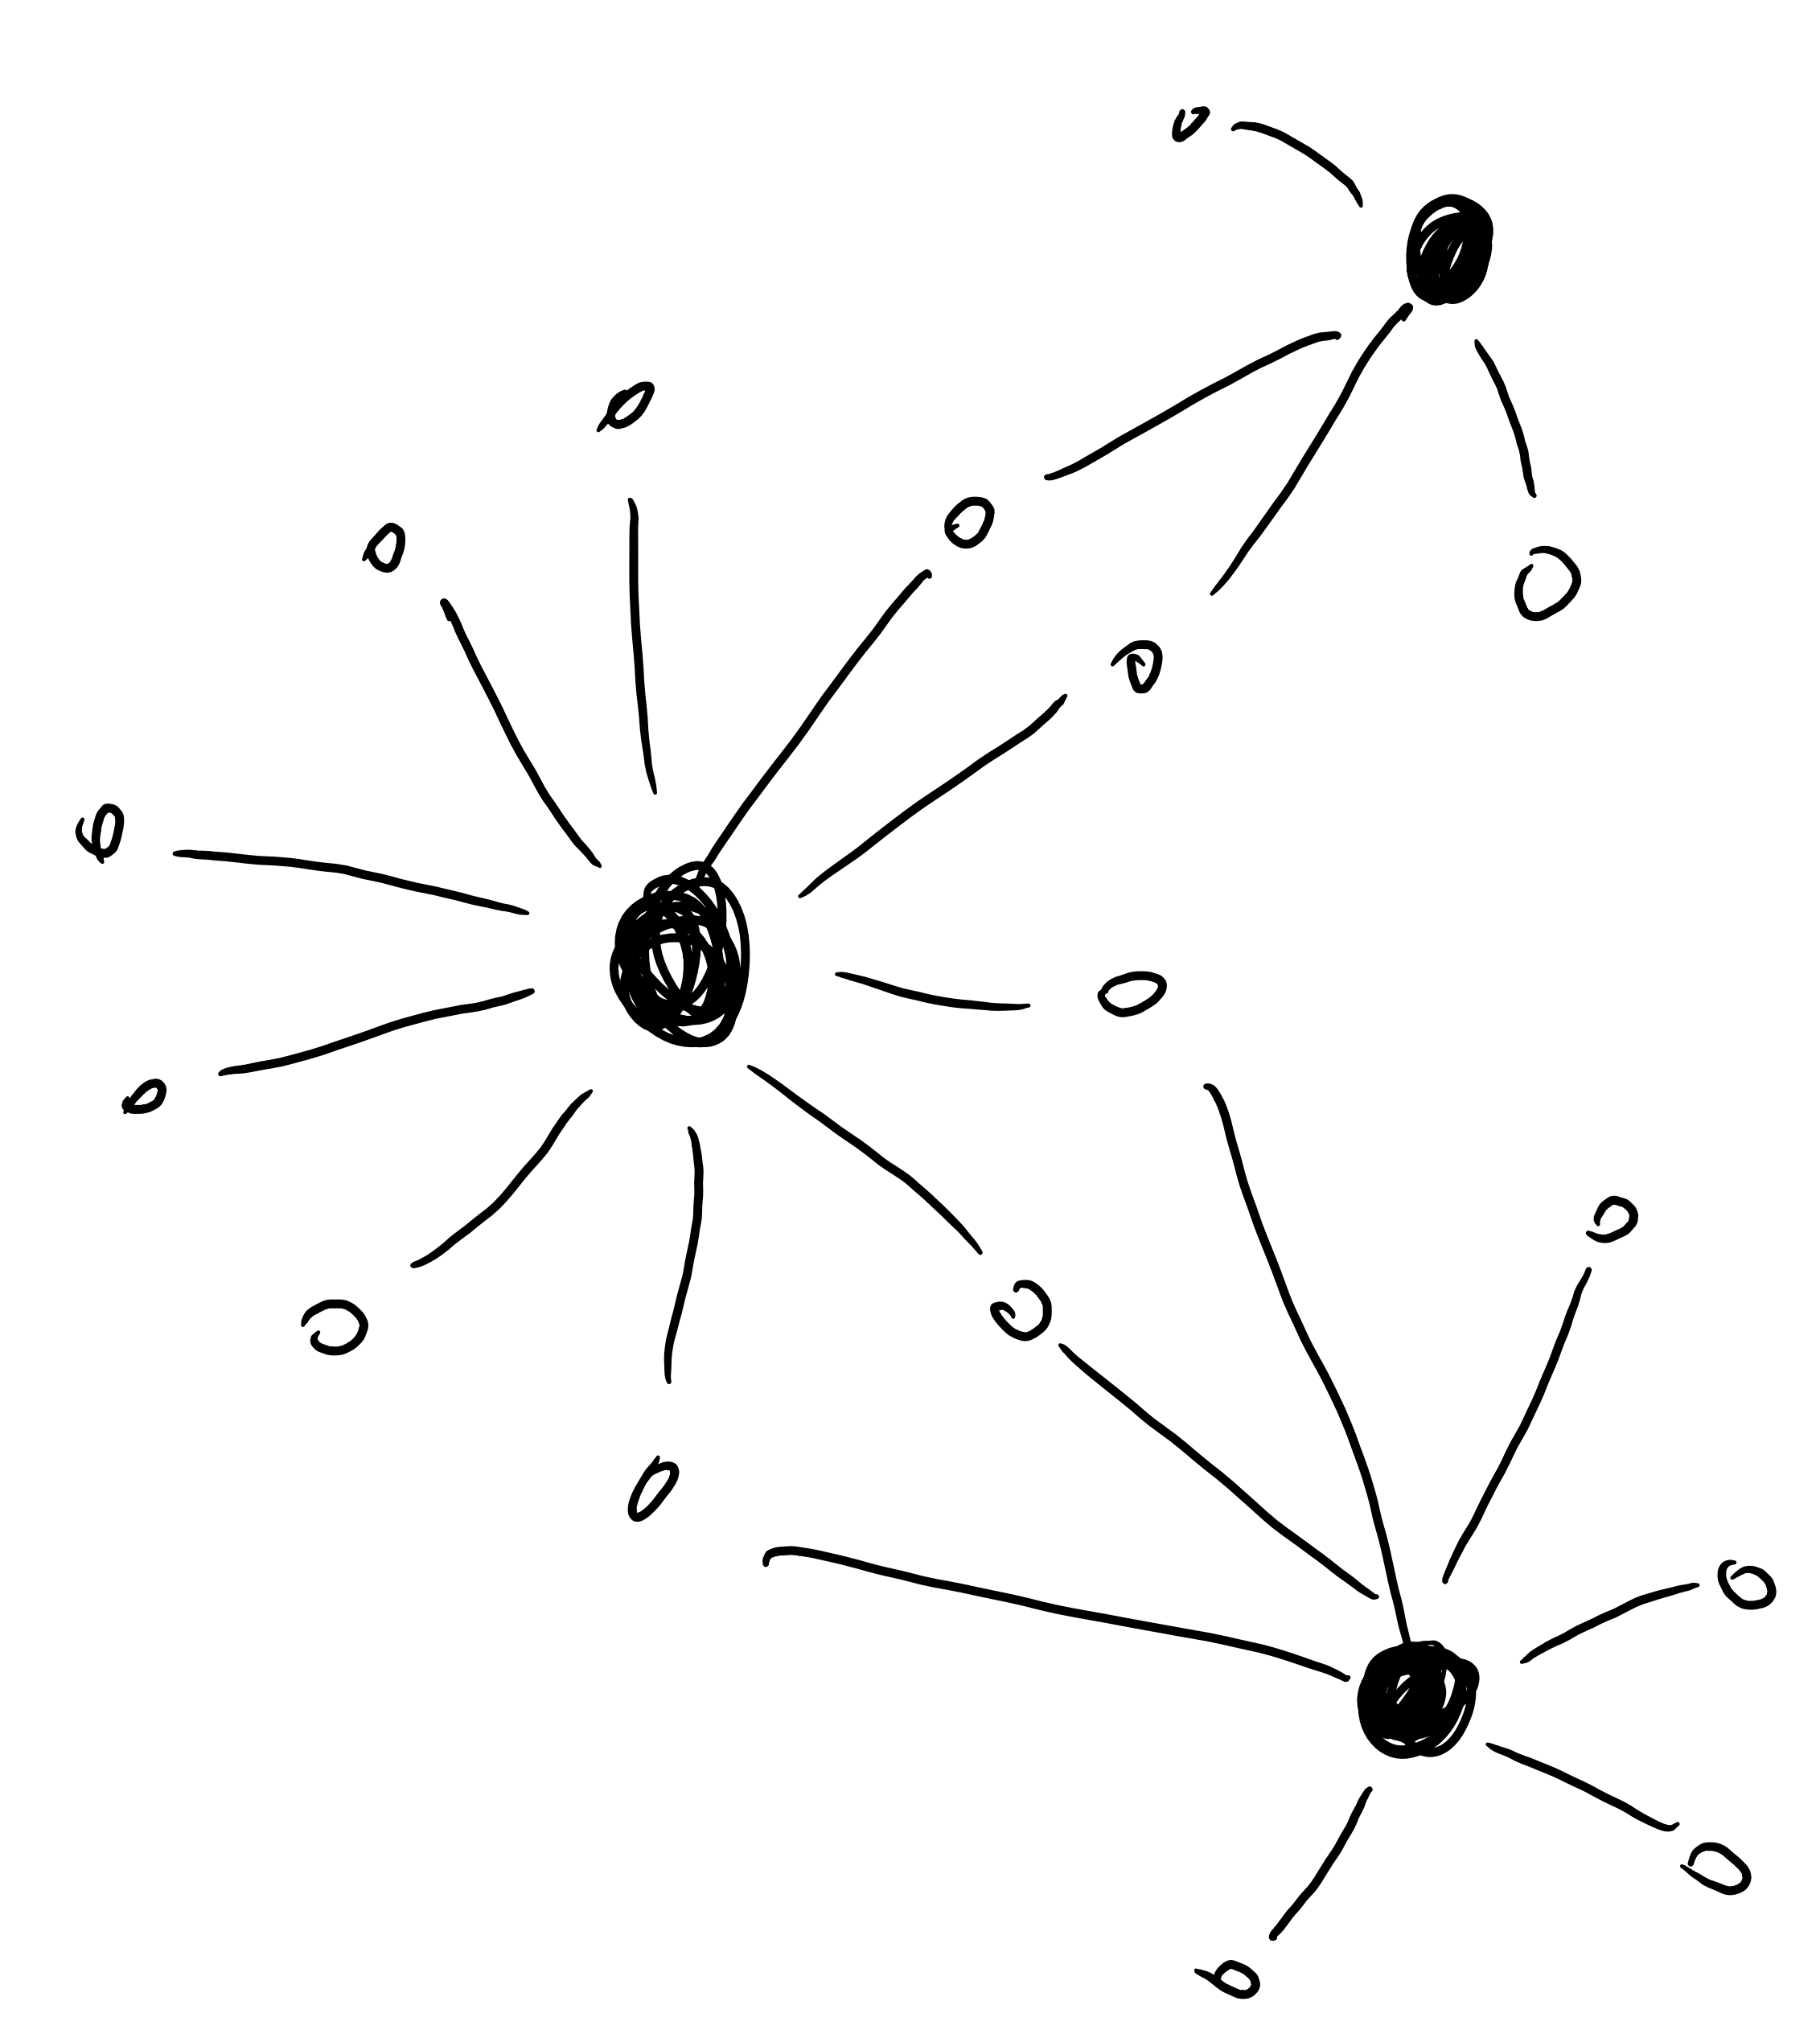 Hub and spoke diagram with multiple hubs